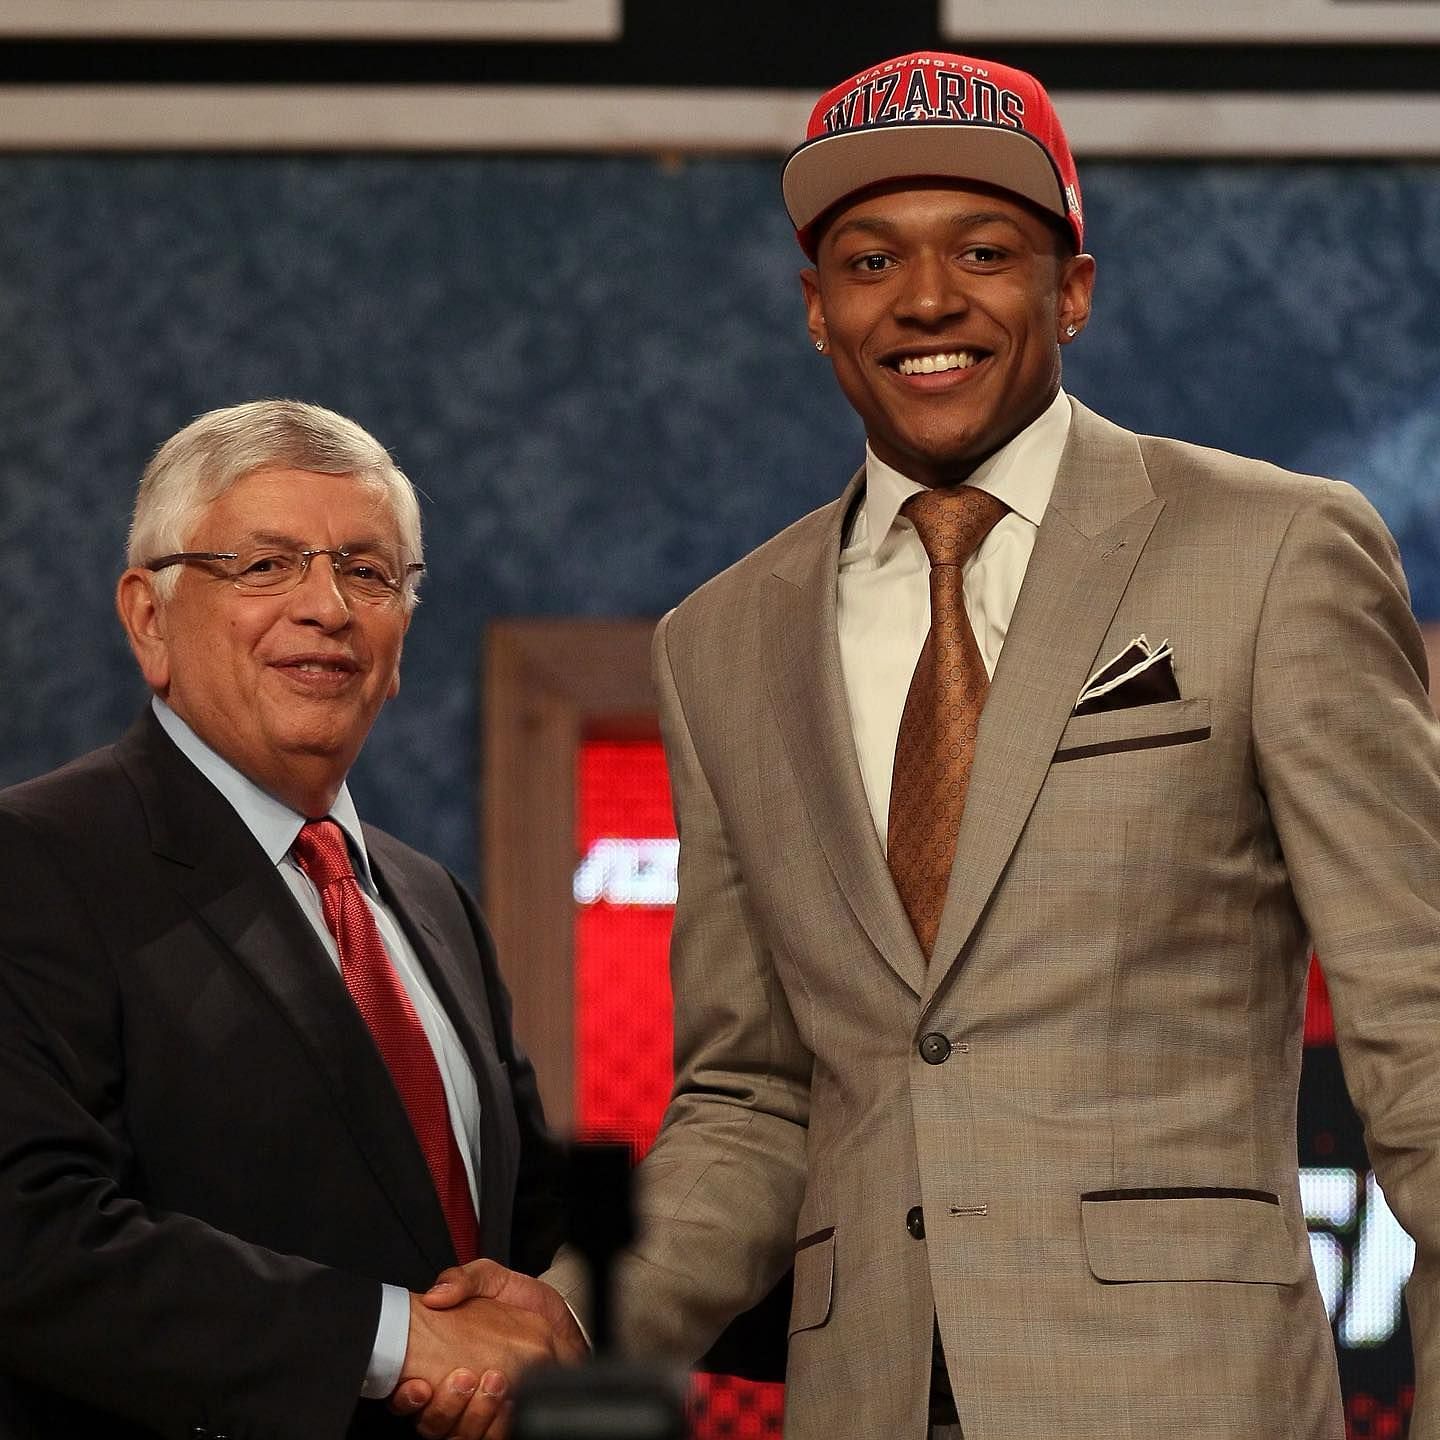 Bradley Beal at the NBA Draft in 2012 (Source: Bradley Beal&rsquo;s Instagram)